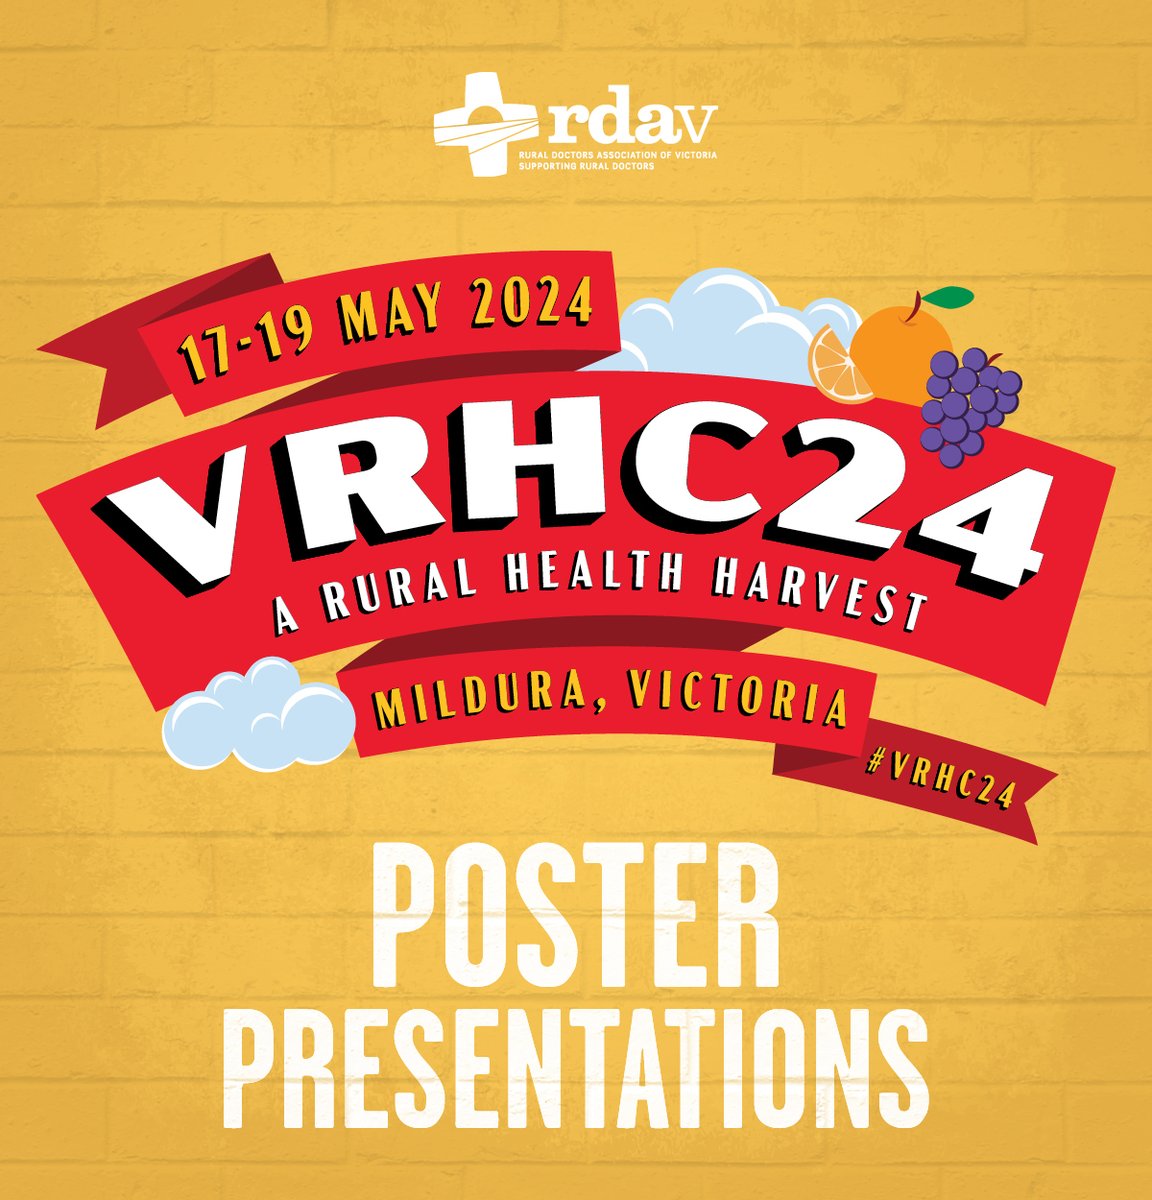 EOI for Victorian Rural Health Conference Poster Presentations closes 31 March 2024 so still plenty of time to get organised. Get all the details here bit.ly/476kxt4 @MonashRural @ACRRM @RACGP @VicRGProgram @MelbConventions @MilduraCouncil